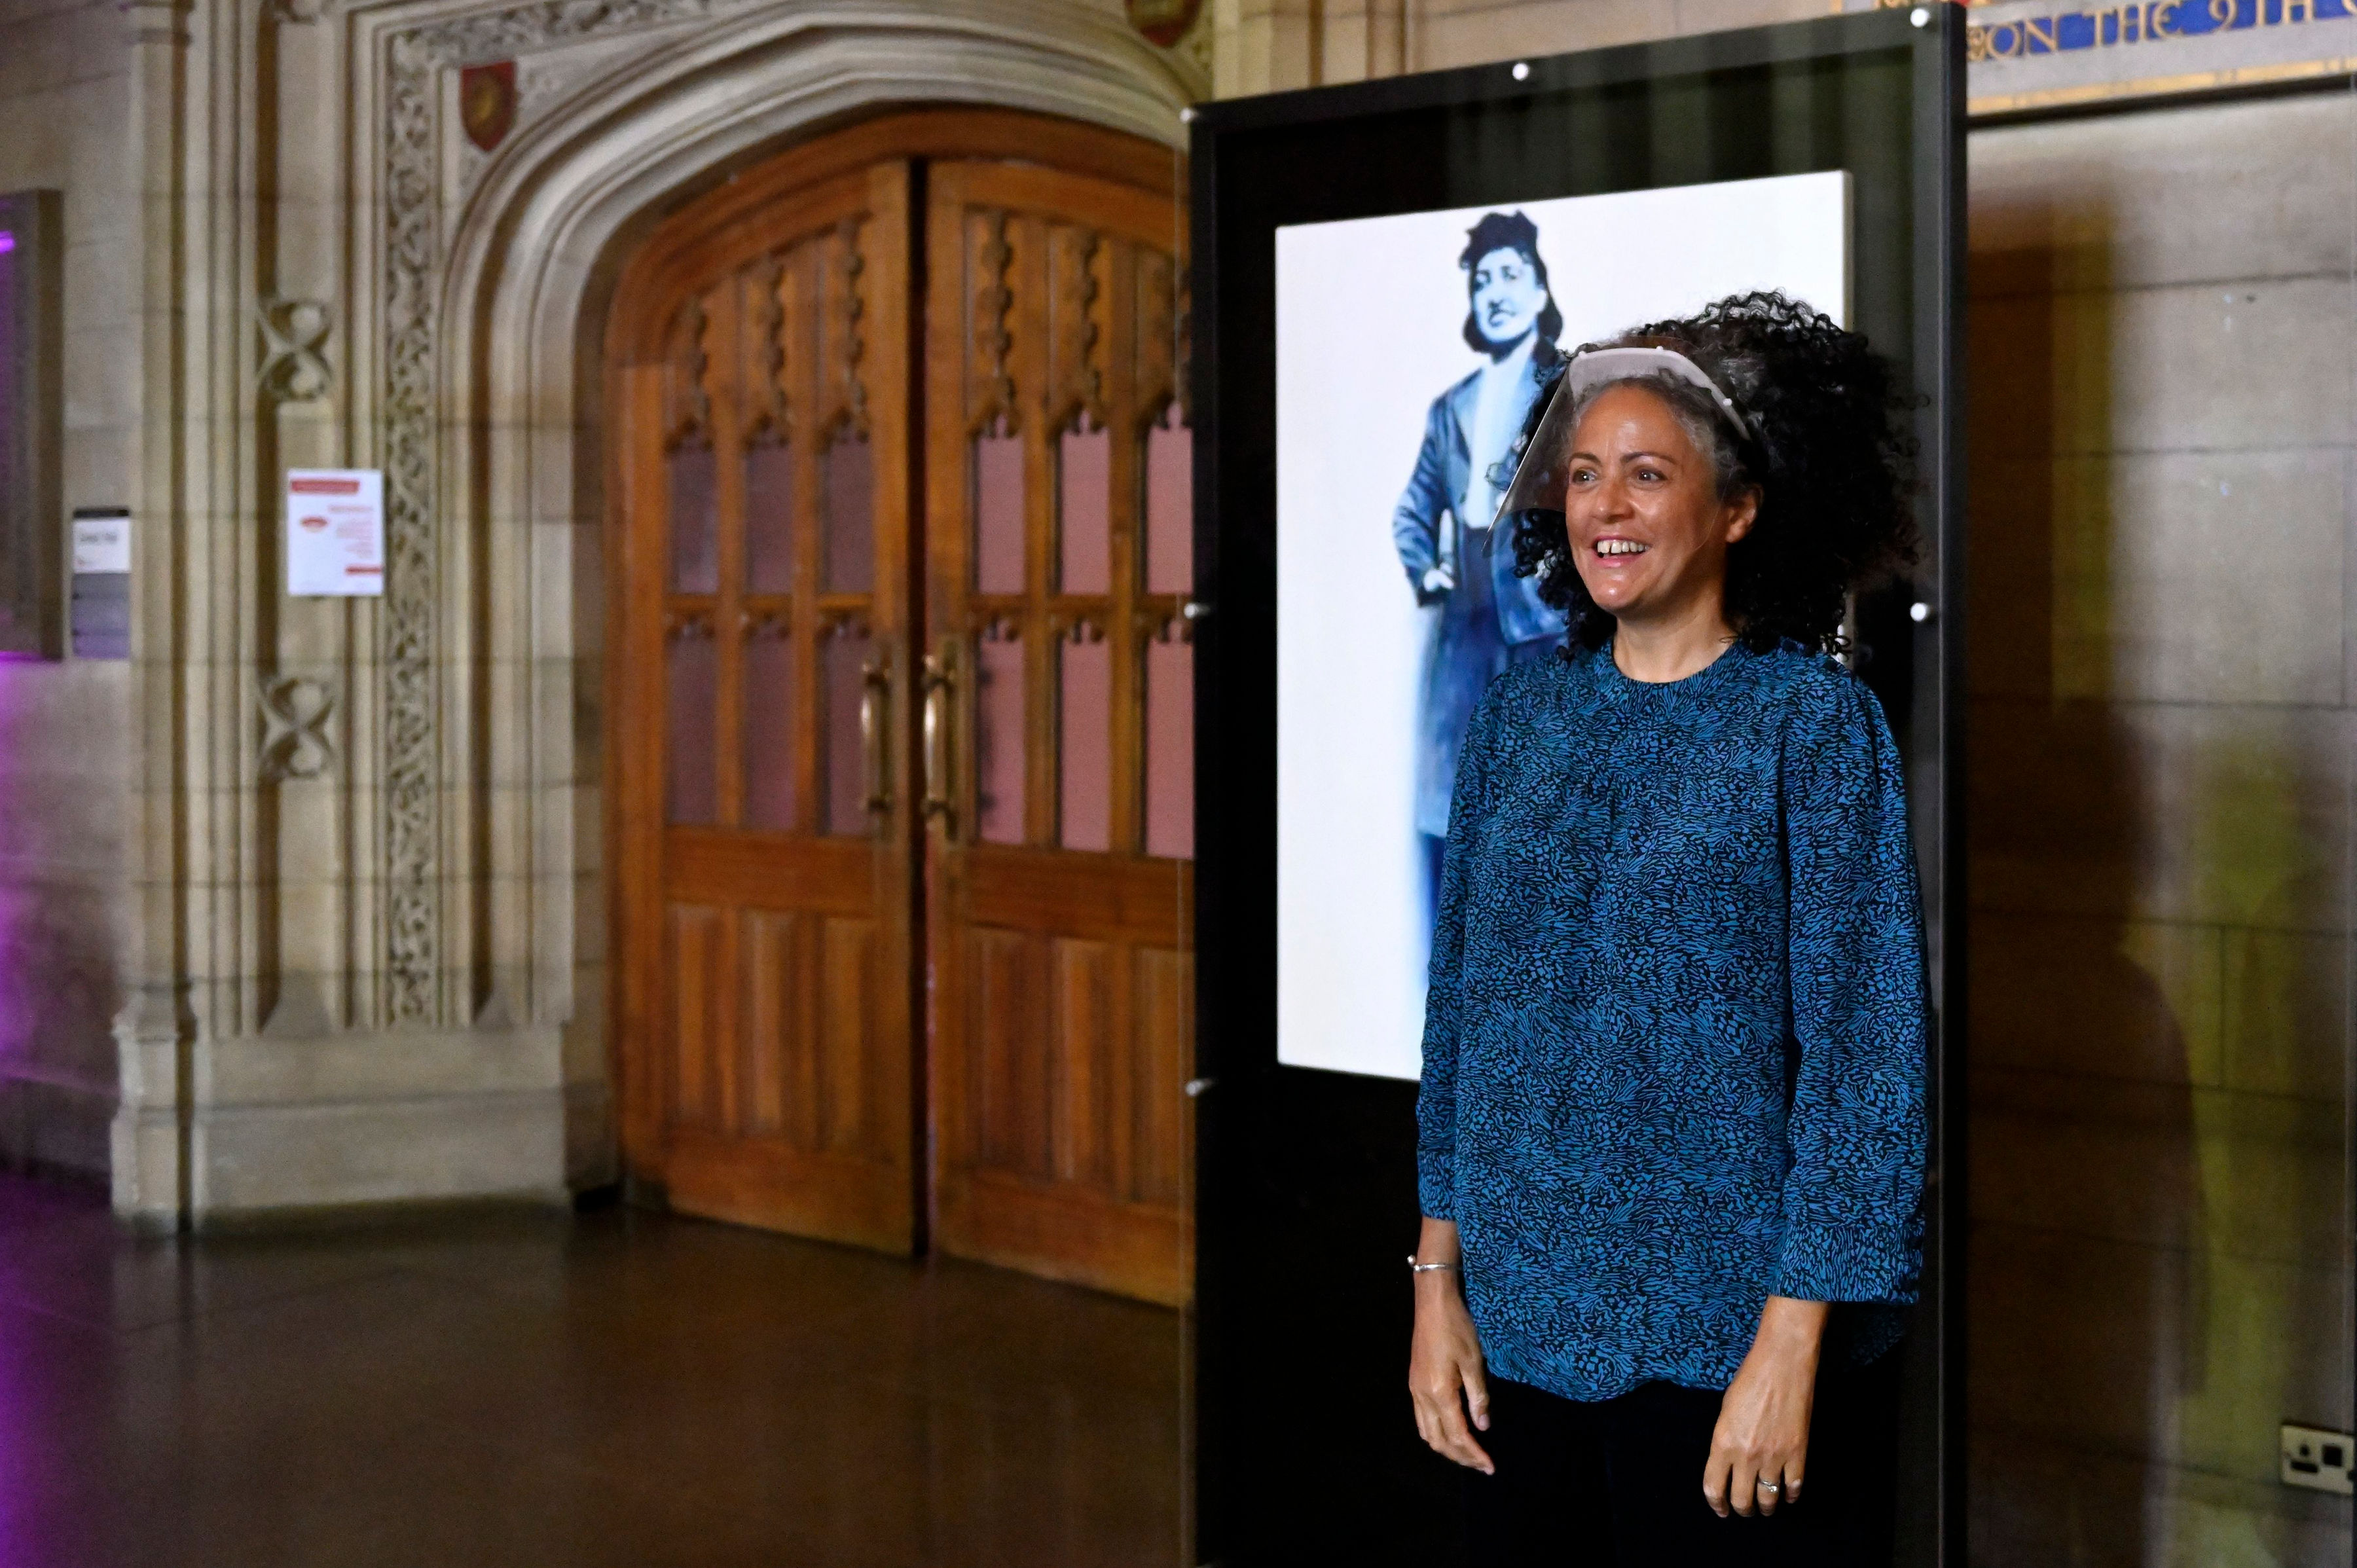 Artist Helen Wilson Roe at the unveiling of her portrait of Henrietta Lacks, which is currently on display at the University of Bristol (Bhagesh Sachania Photography/University of Bristol/PA).